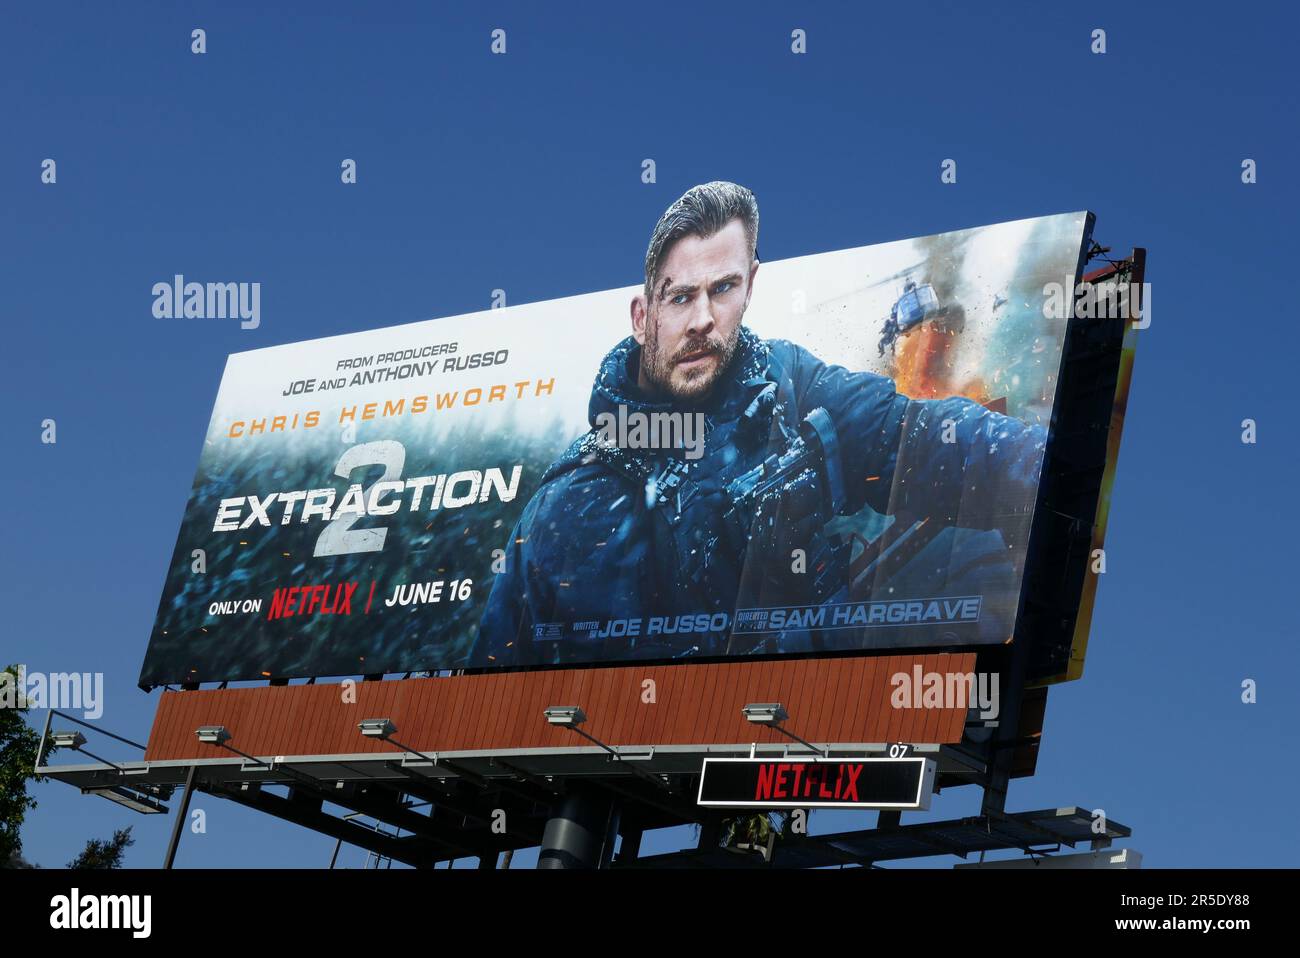 Los Angeles, California, USA 2nd June 2023 Helicopter on Chris Hemsworth Extraction 2 Netflix Billboard on Sunset Blvd on June 2, 2023 in Los Angeles, California, USA. Photo by Barry King/Alamy Stock Photo Stock Photo